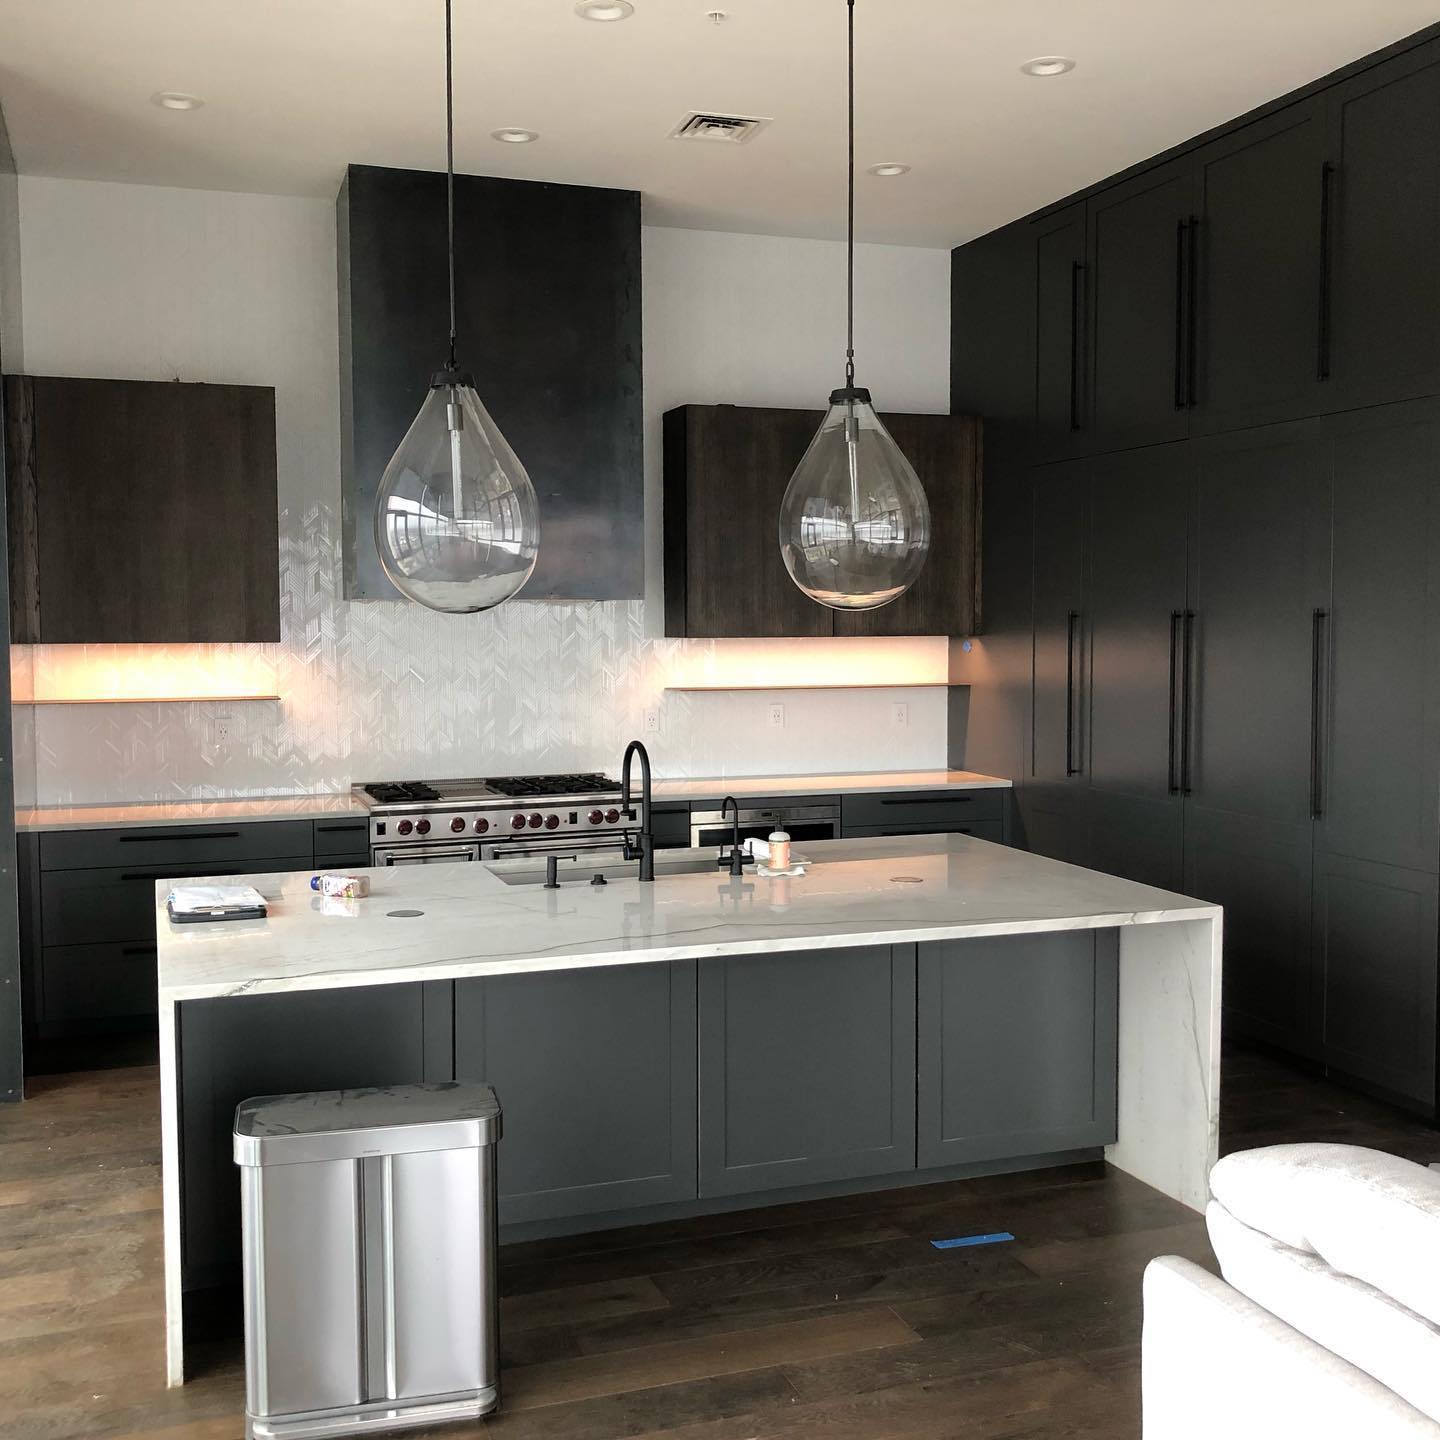 Sleek All Black Cabinets with Marble Island